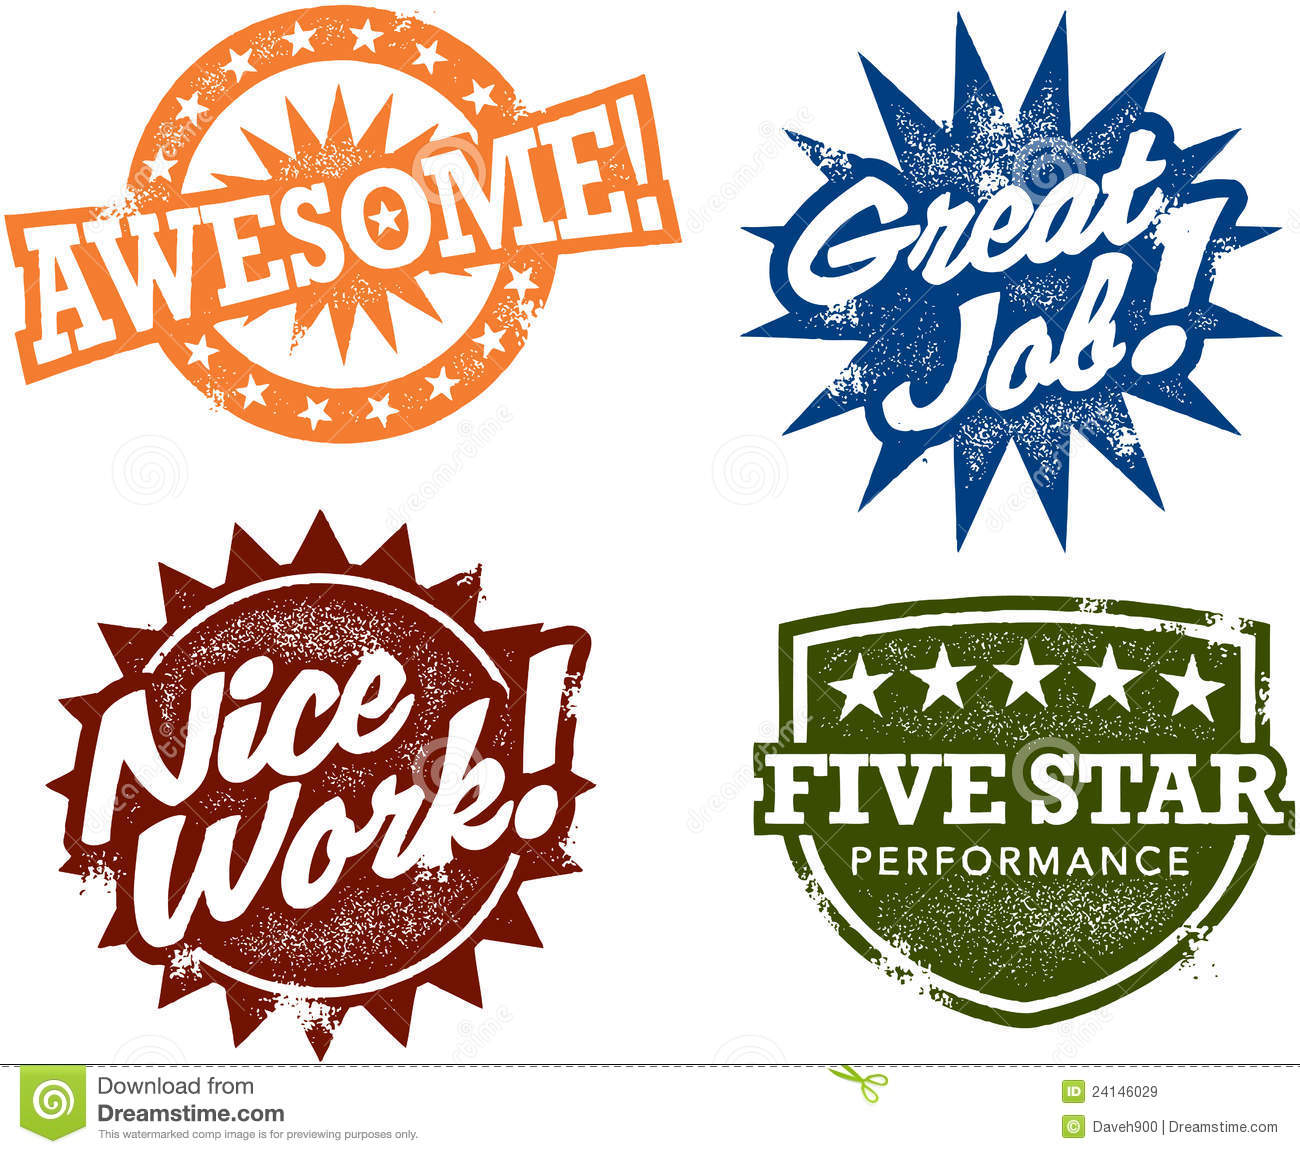 Awesome Performance Reward Stamps Royalty Free Stock Images   Image